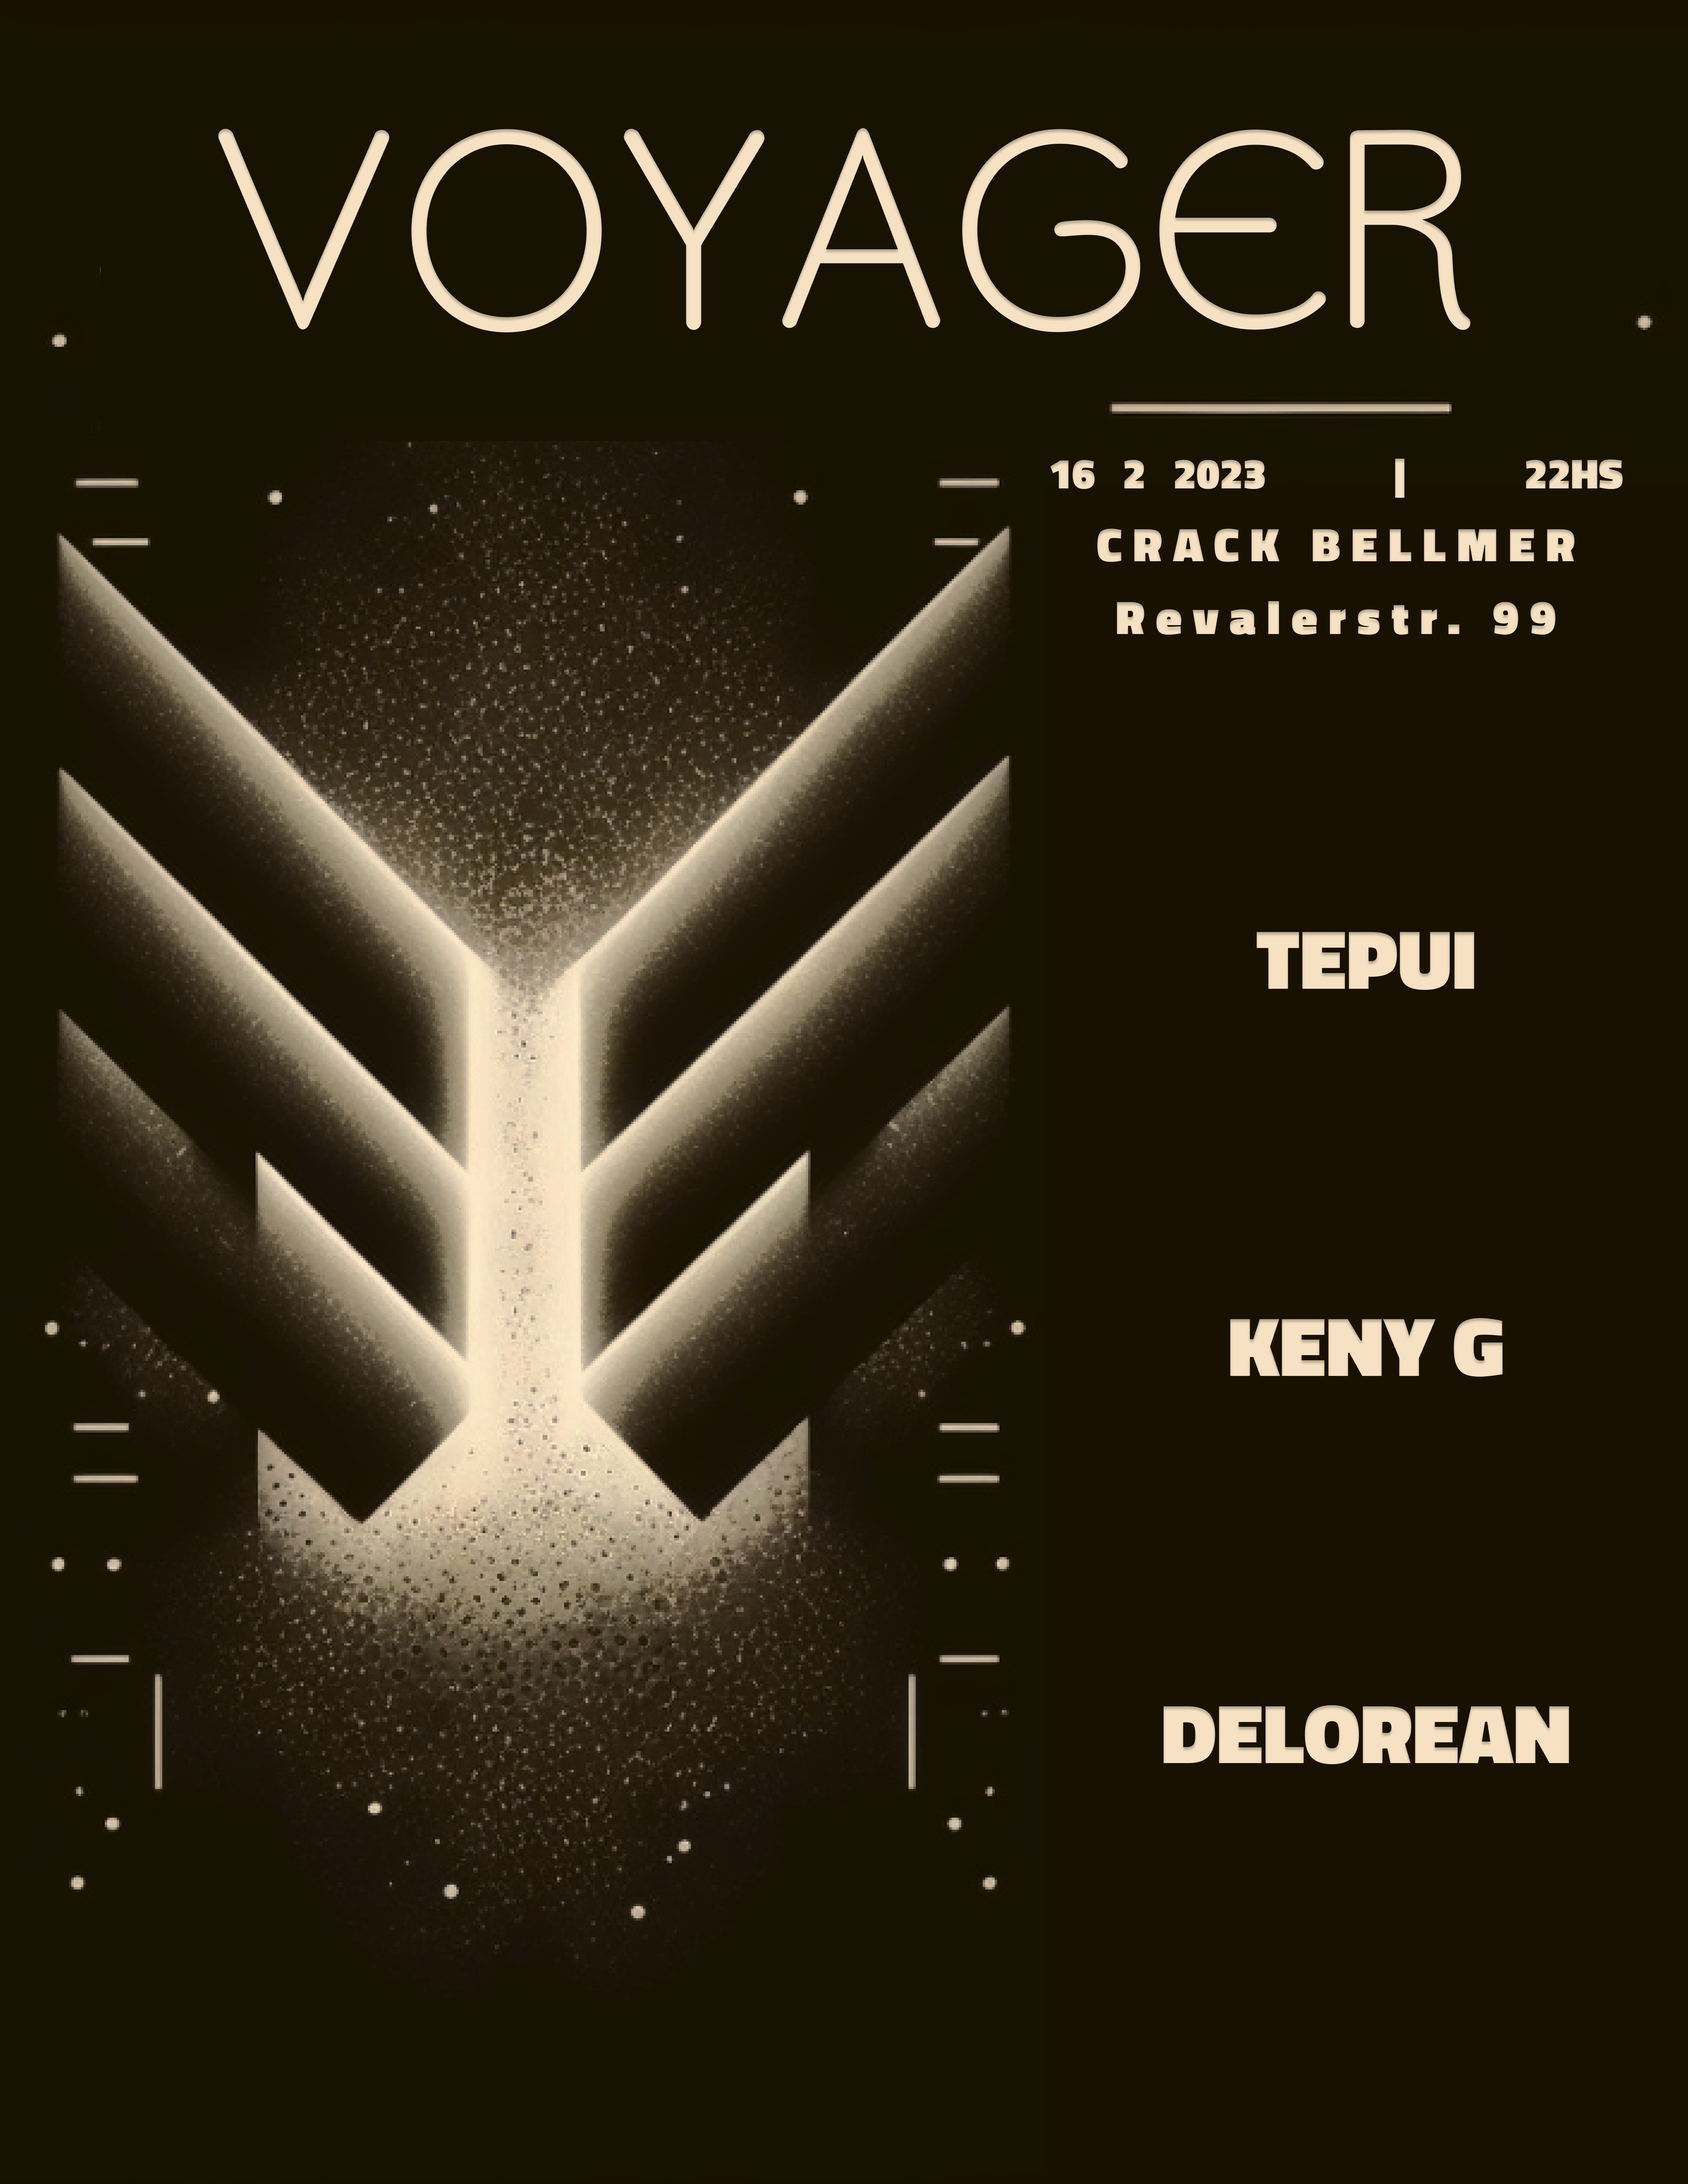 Voyager with Tepui, Keny G, Delorean - フライヤー表